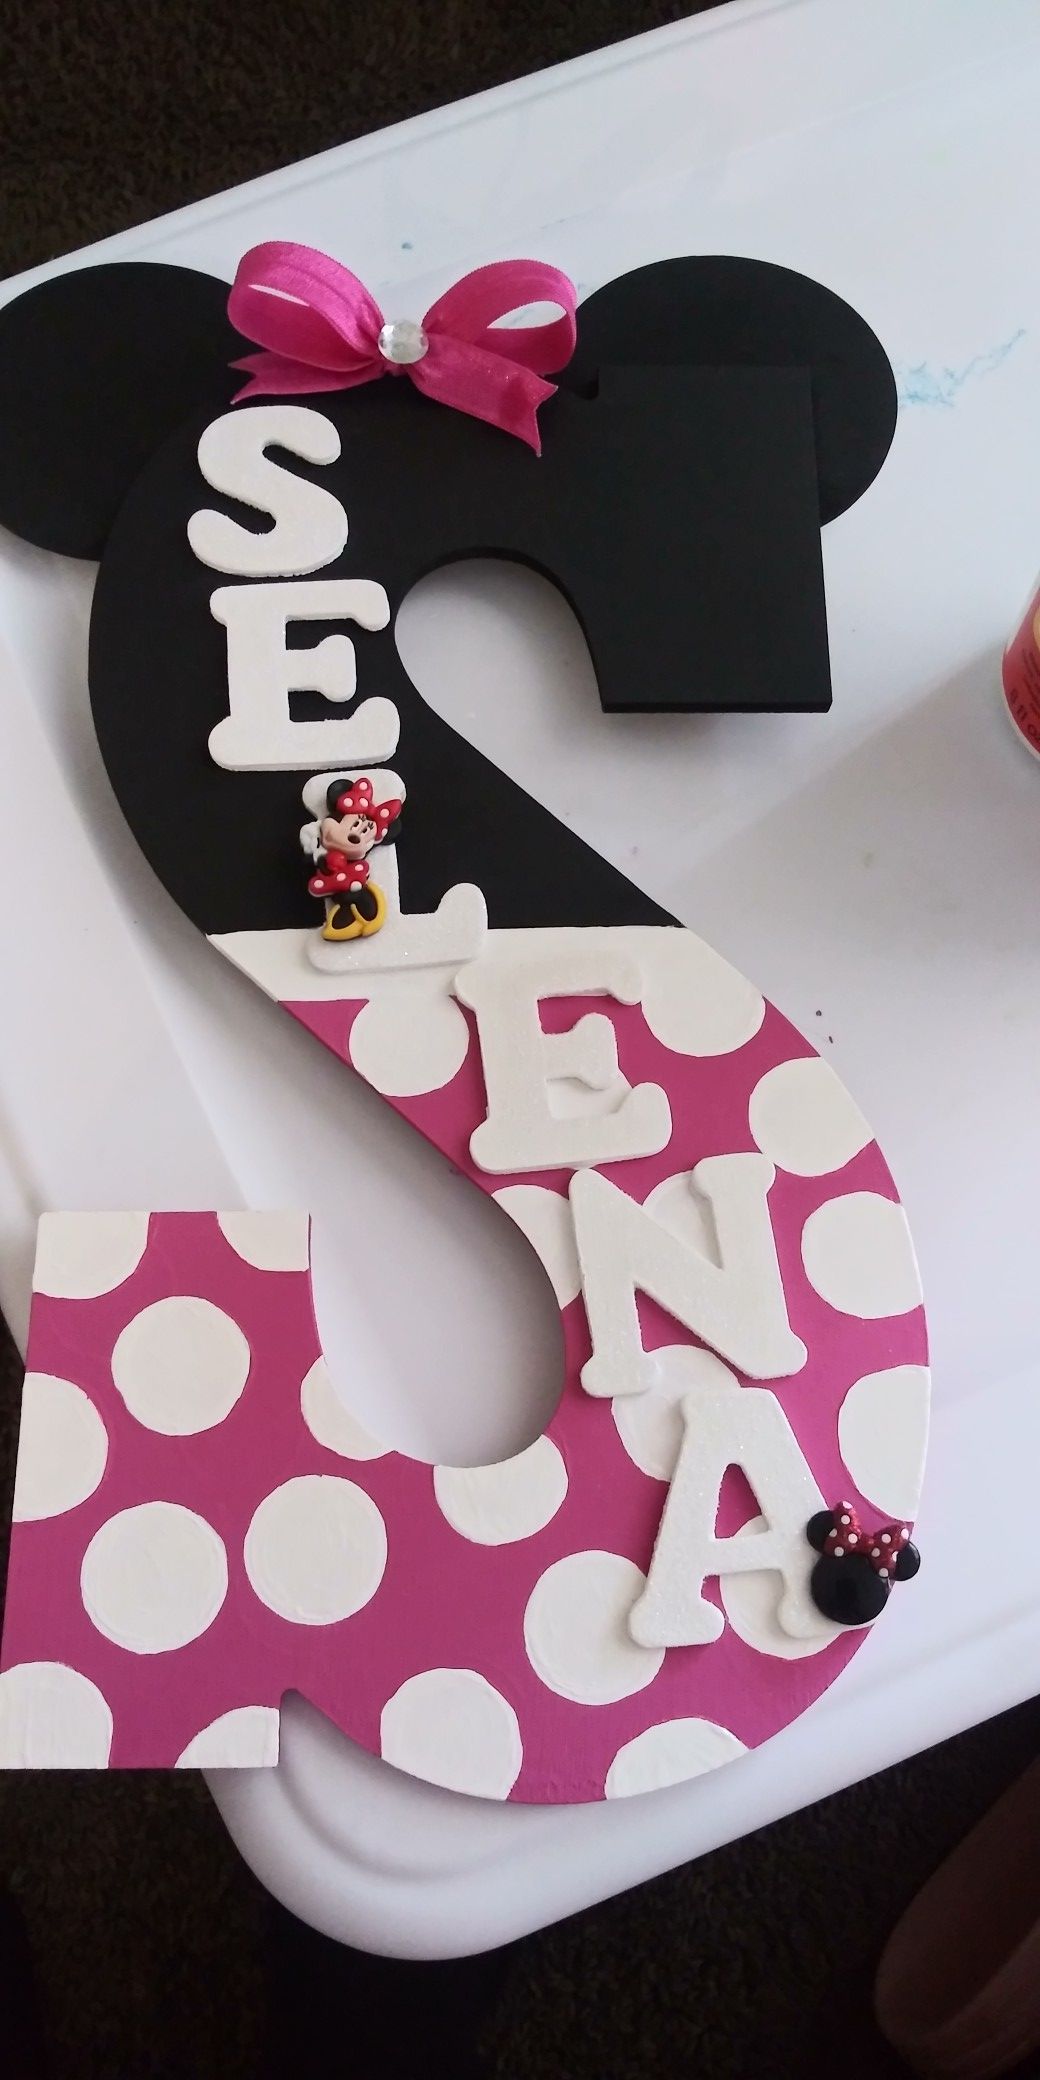 Hand painted letters